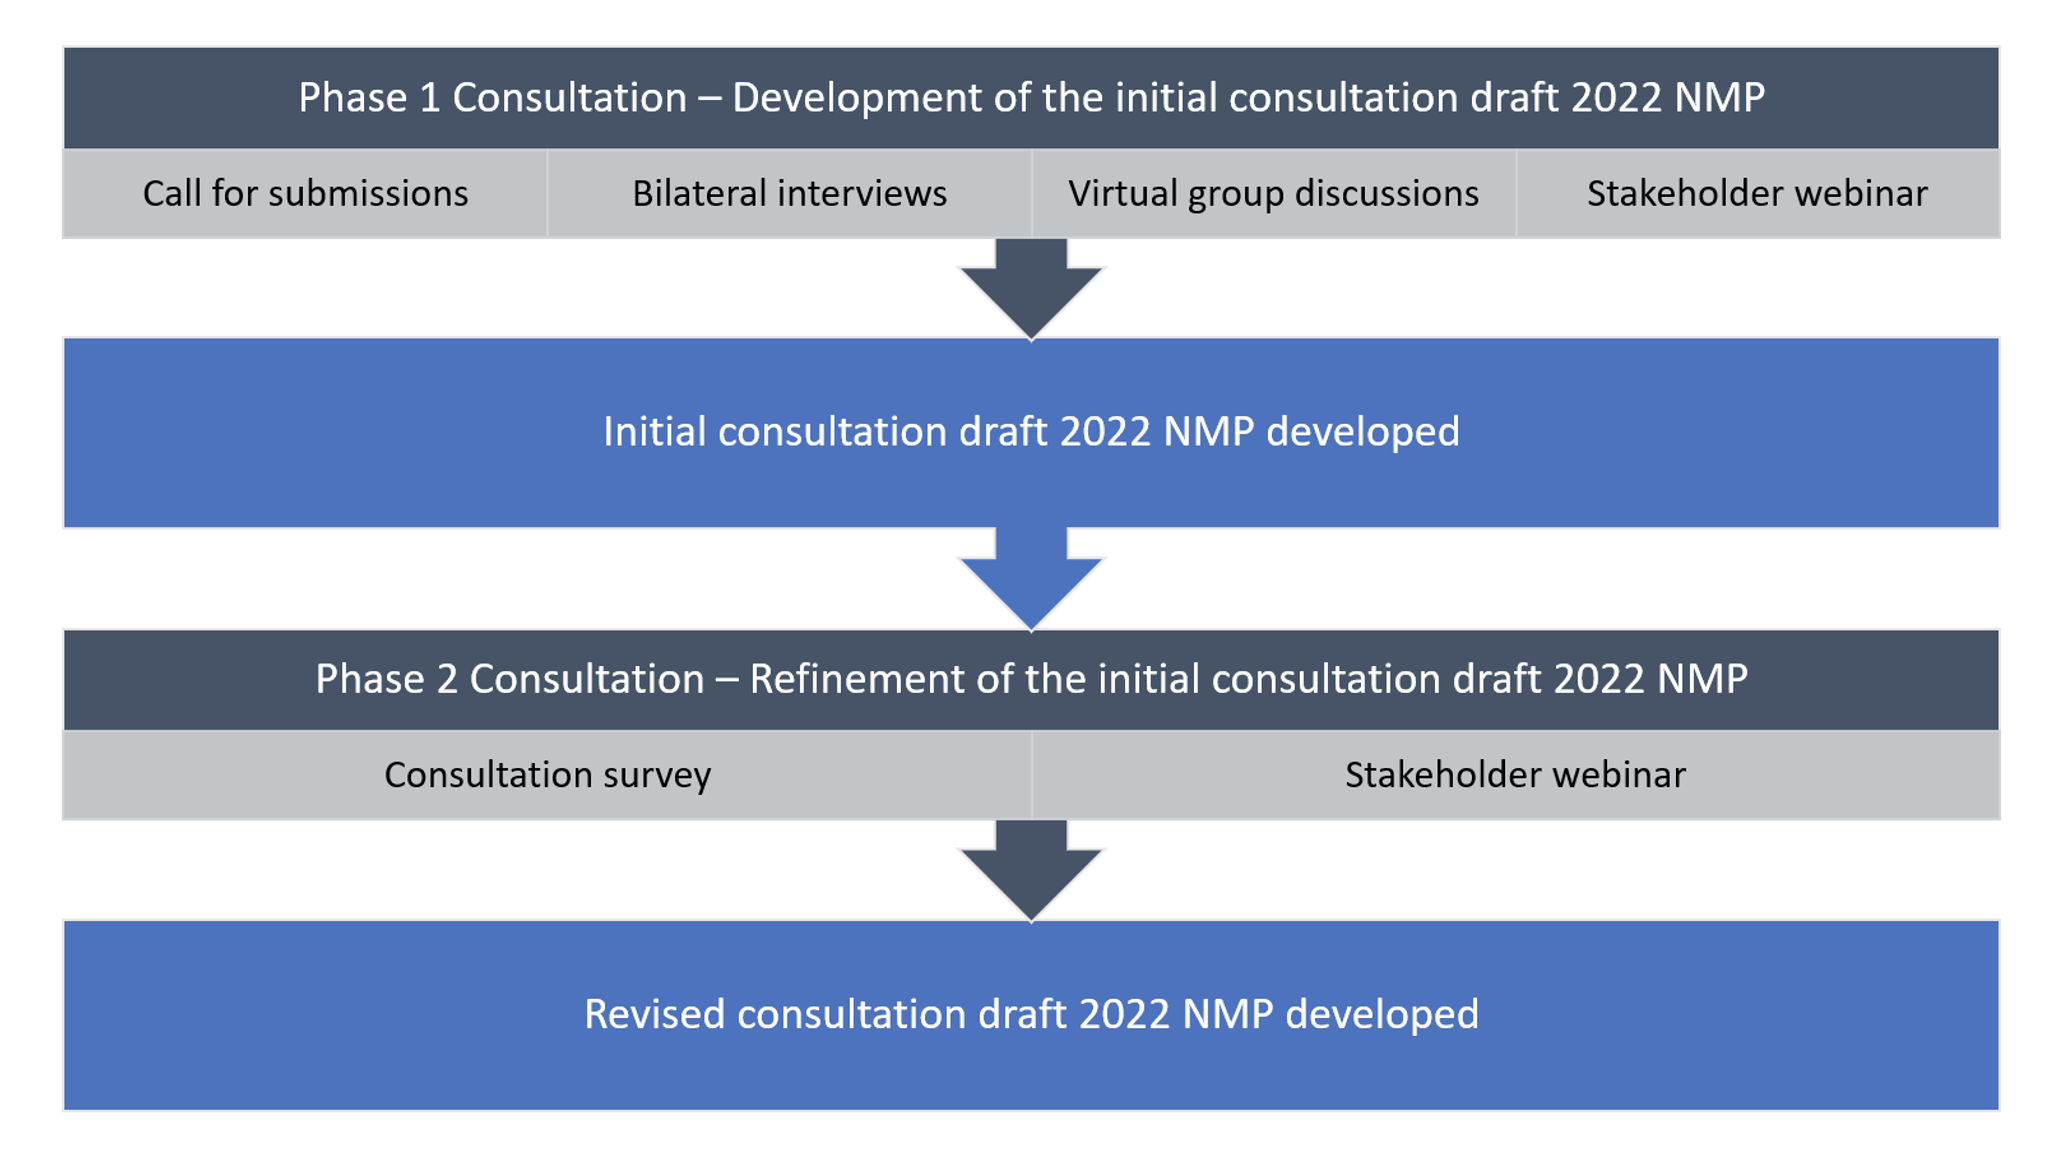 Summary of consultation phases completed between August 2021 and March 2022.